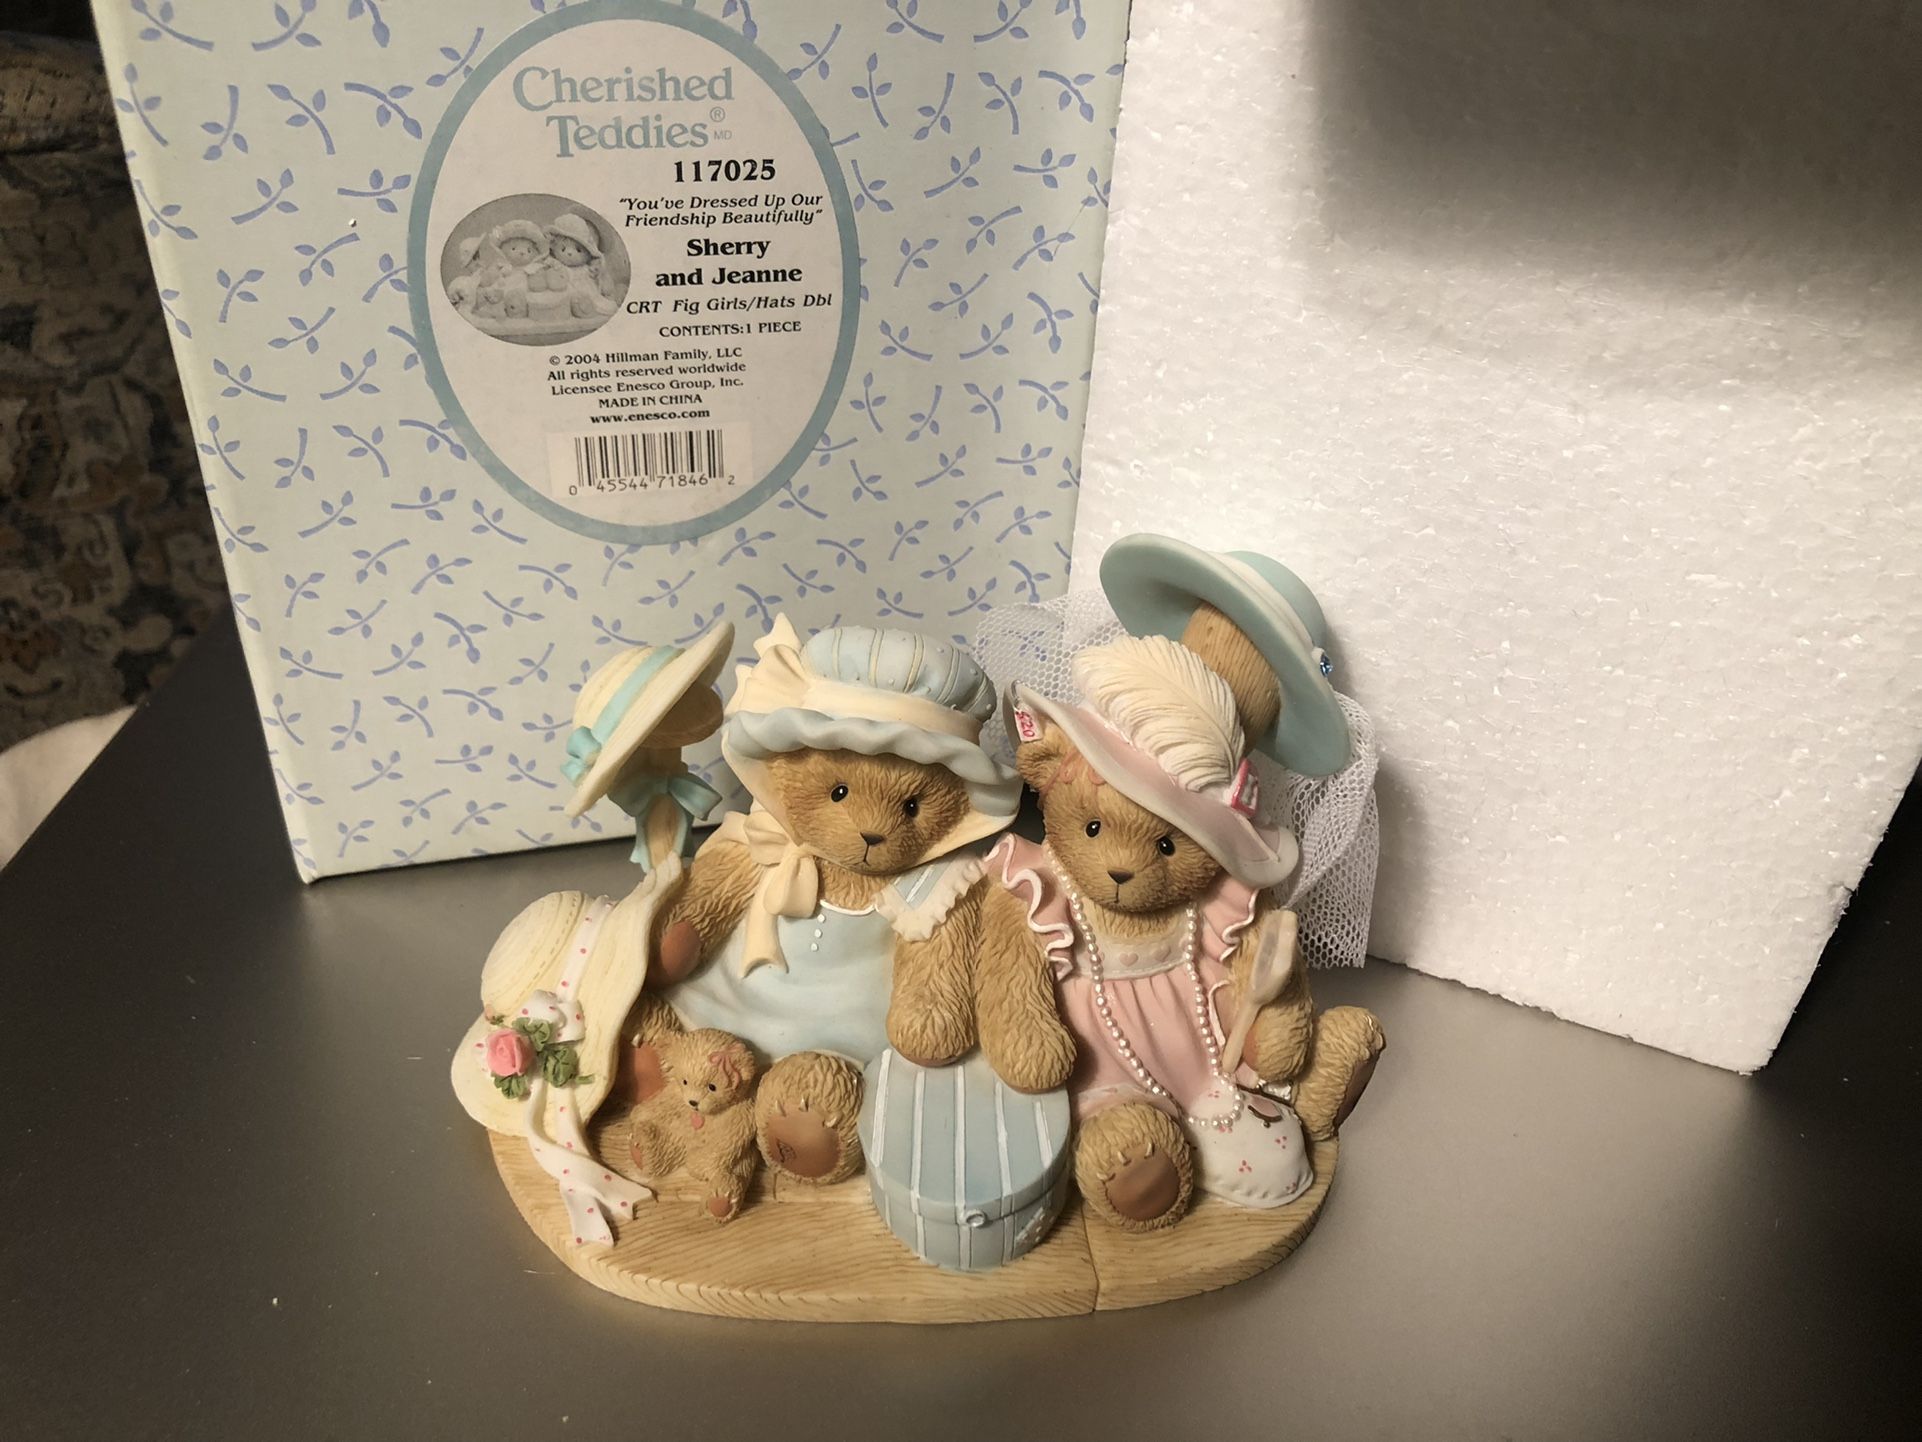 Cherished Teddies “You’ve Dressed Up Our Friendship Beautifully”